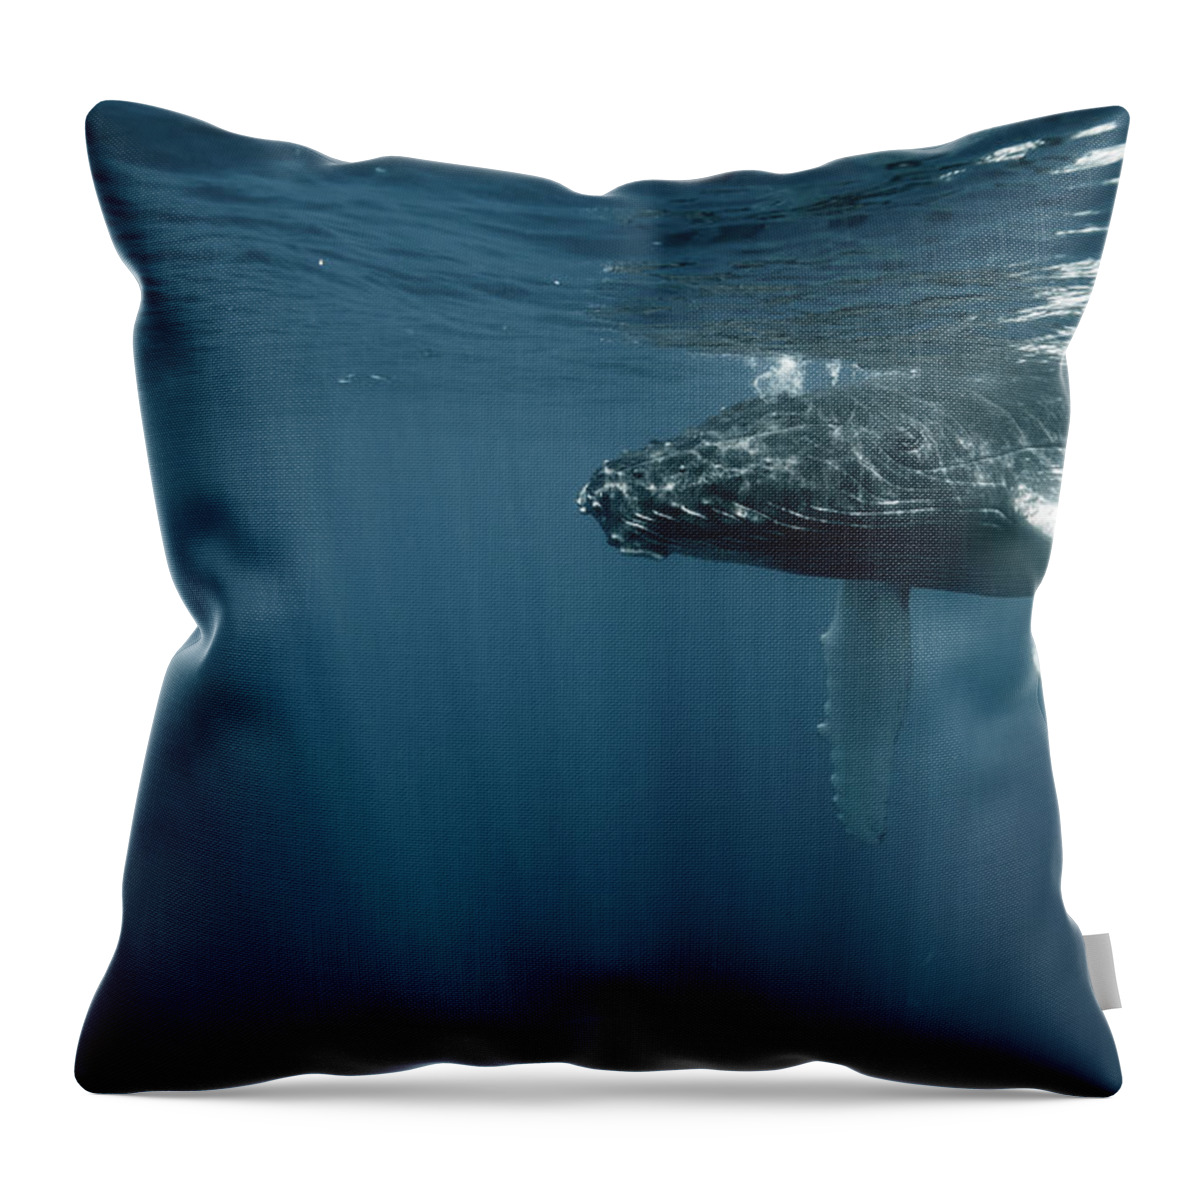 Underwater Throw Pillow featuring the photograph Humpback Whale Calf by Kerstin Meyer